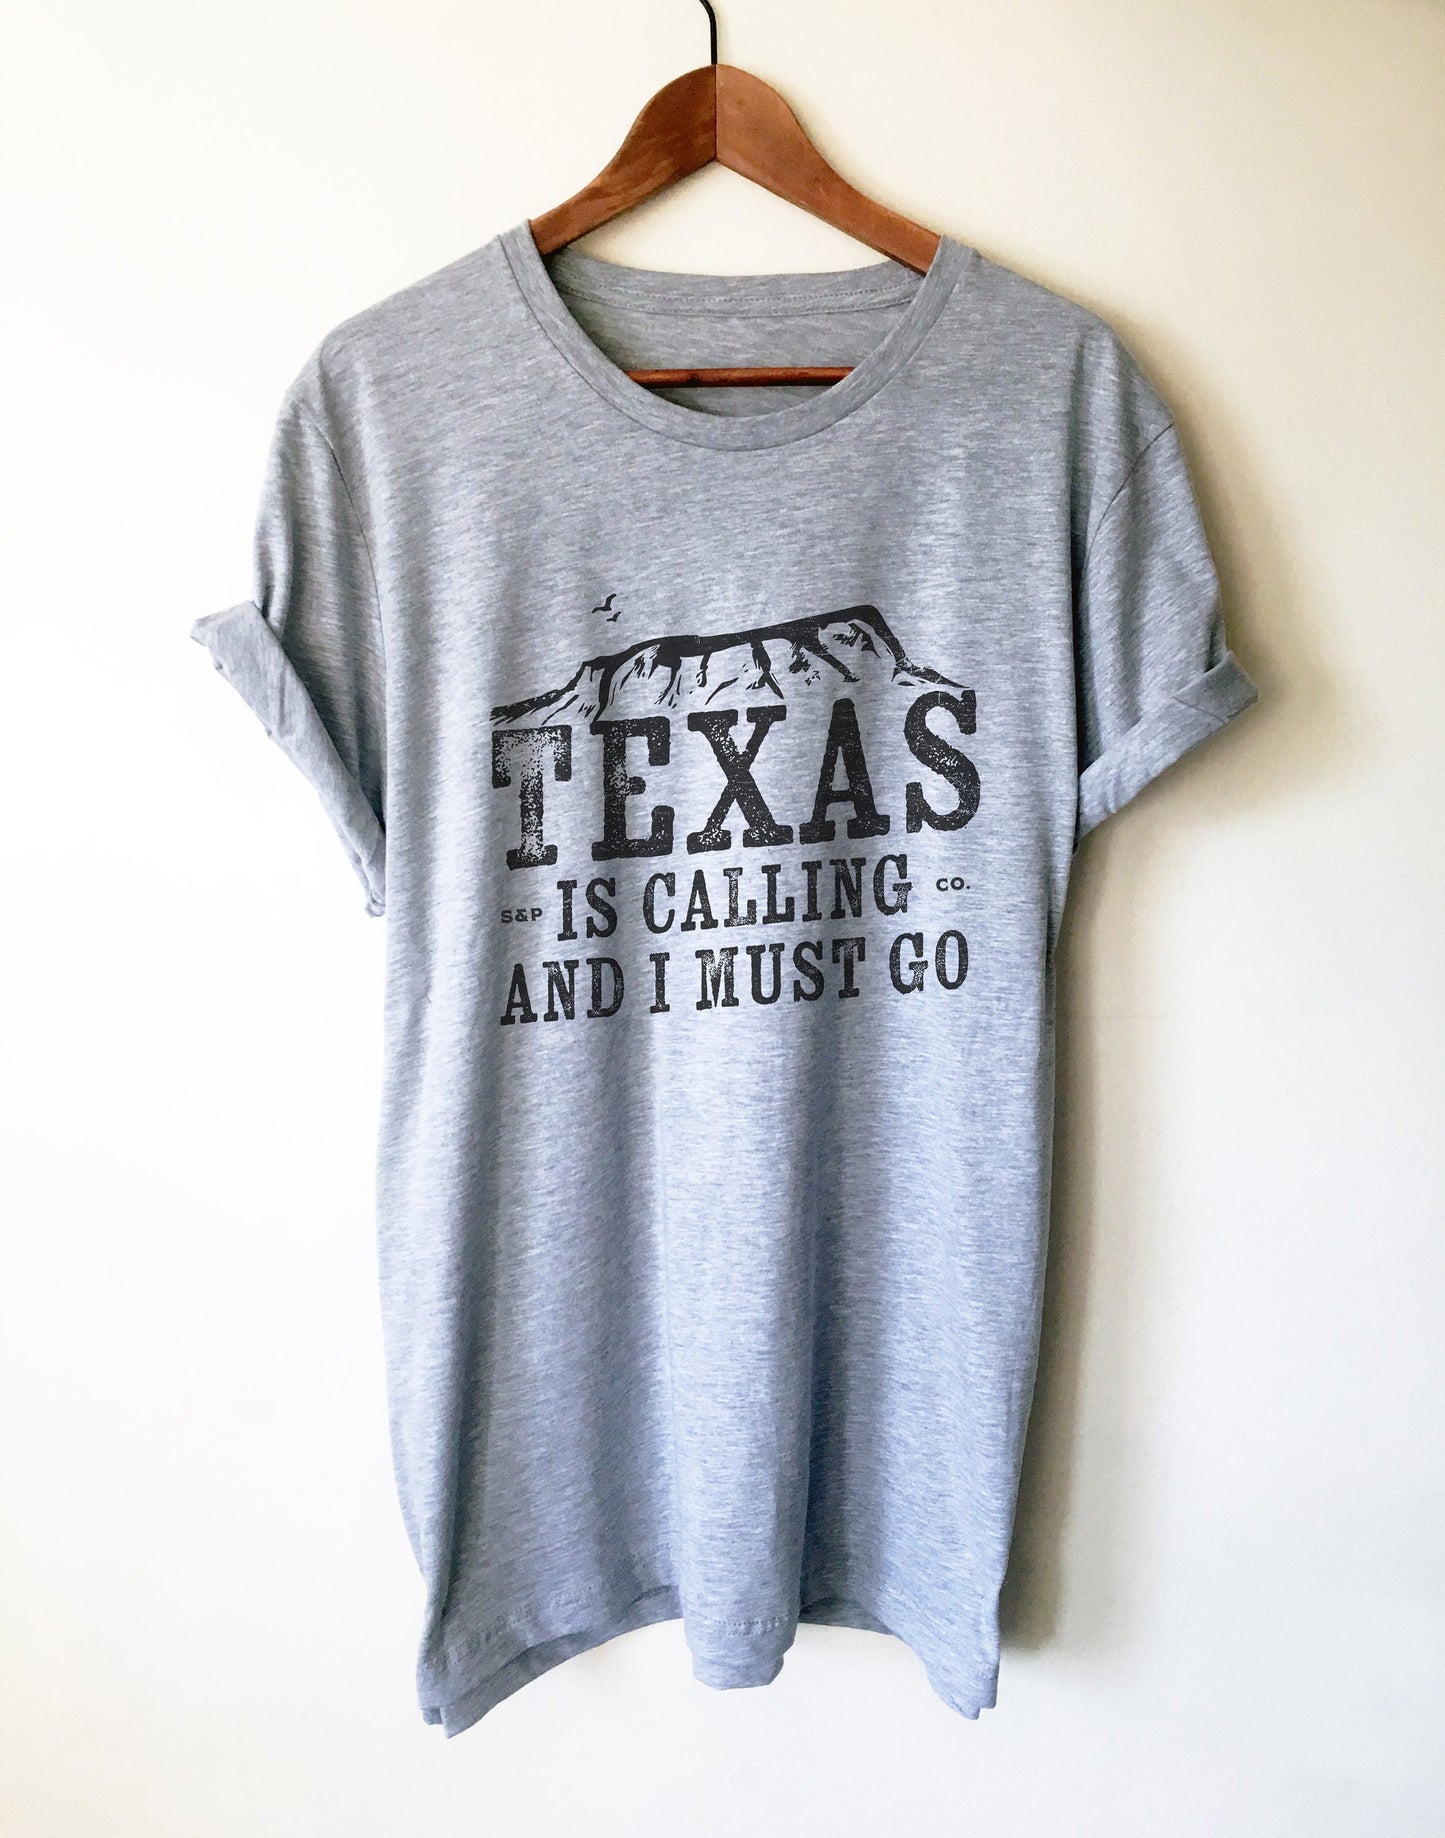 Texas Is Calling And I Must Go Unisex Shirt - Texas Shirt, Texas Gift, Texas Pride, Texas Girl, Texas State Shirt, Southern Shirt